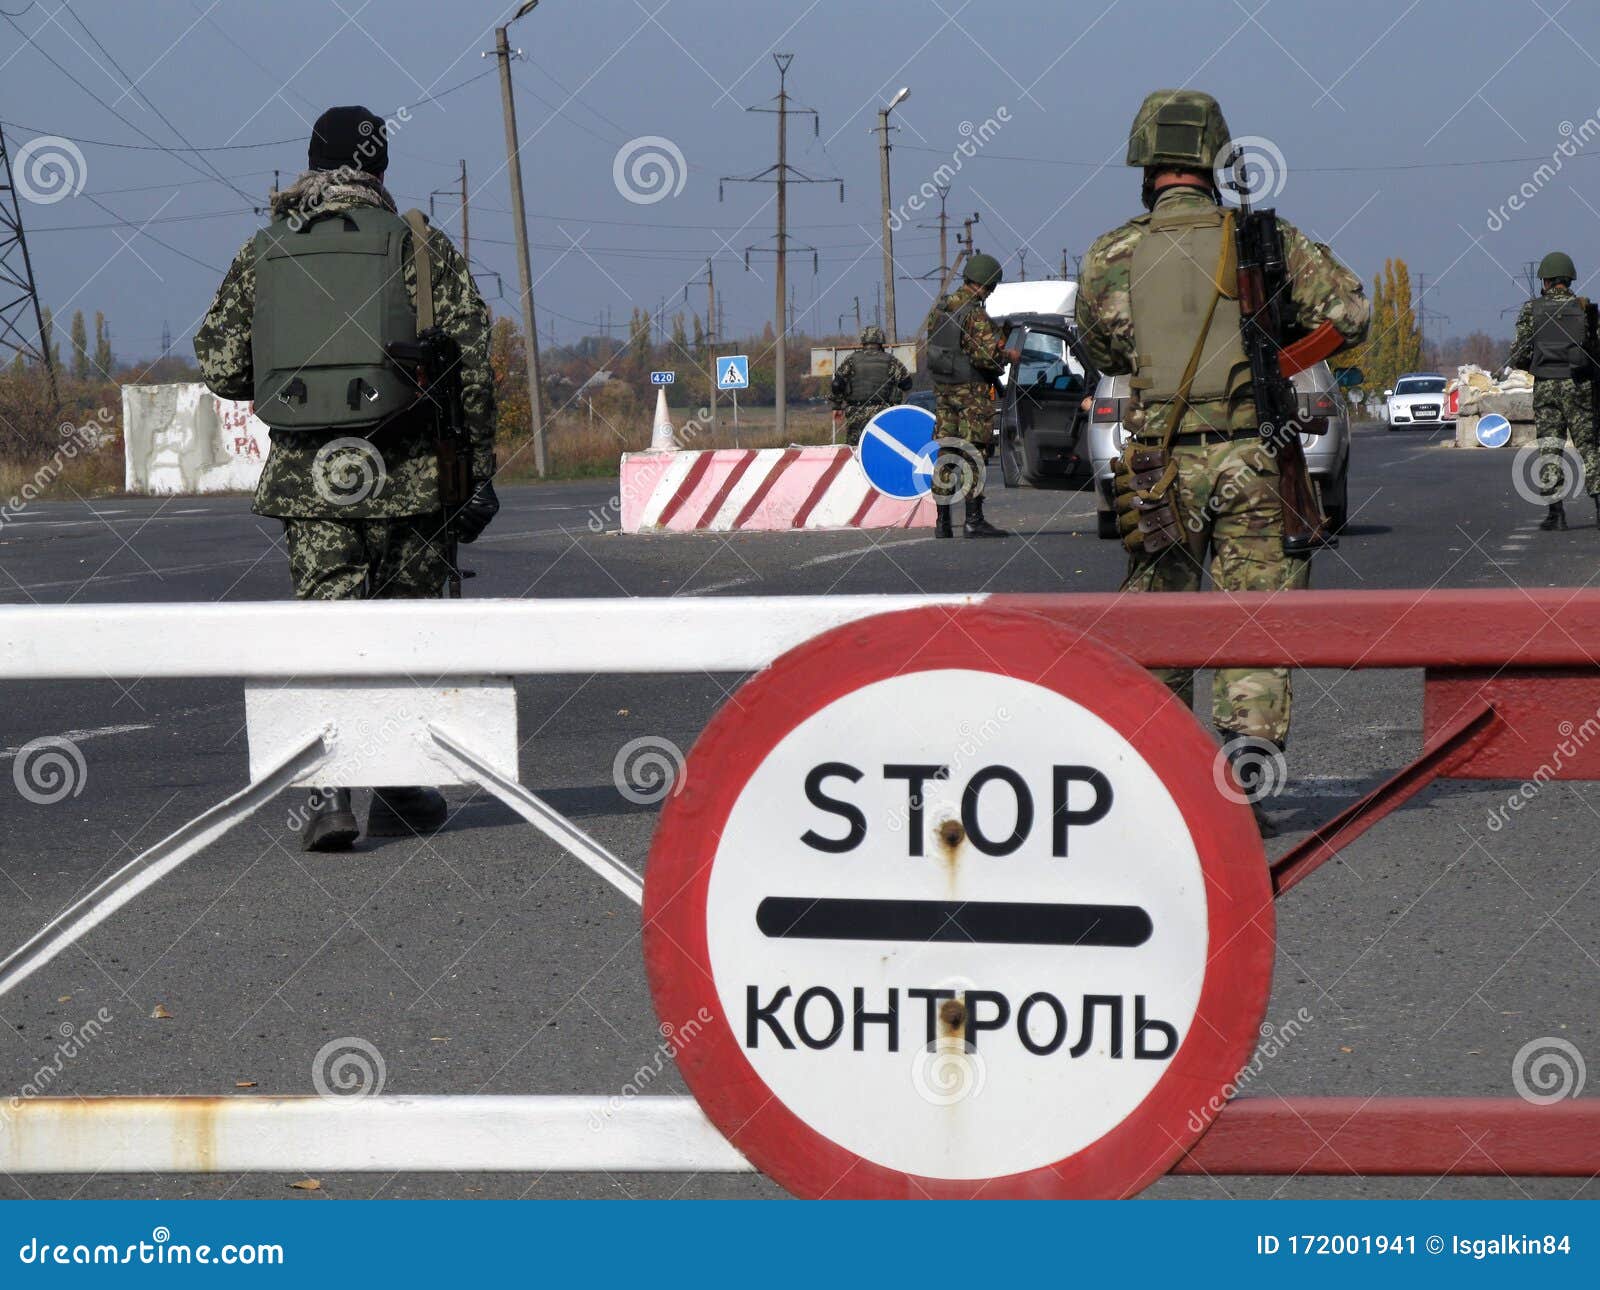 armed ukrainian border guards check vehicles on  the security checkpoint. war in donbass. the inscription on the road sign - stop.